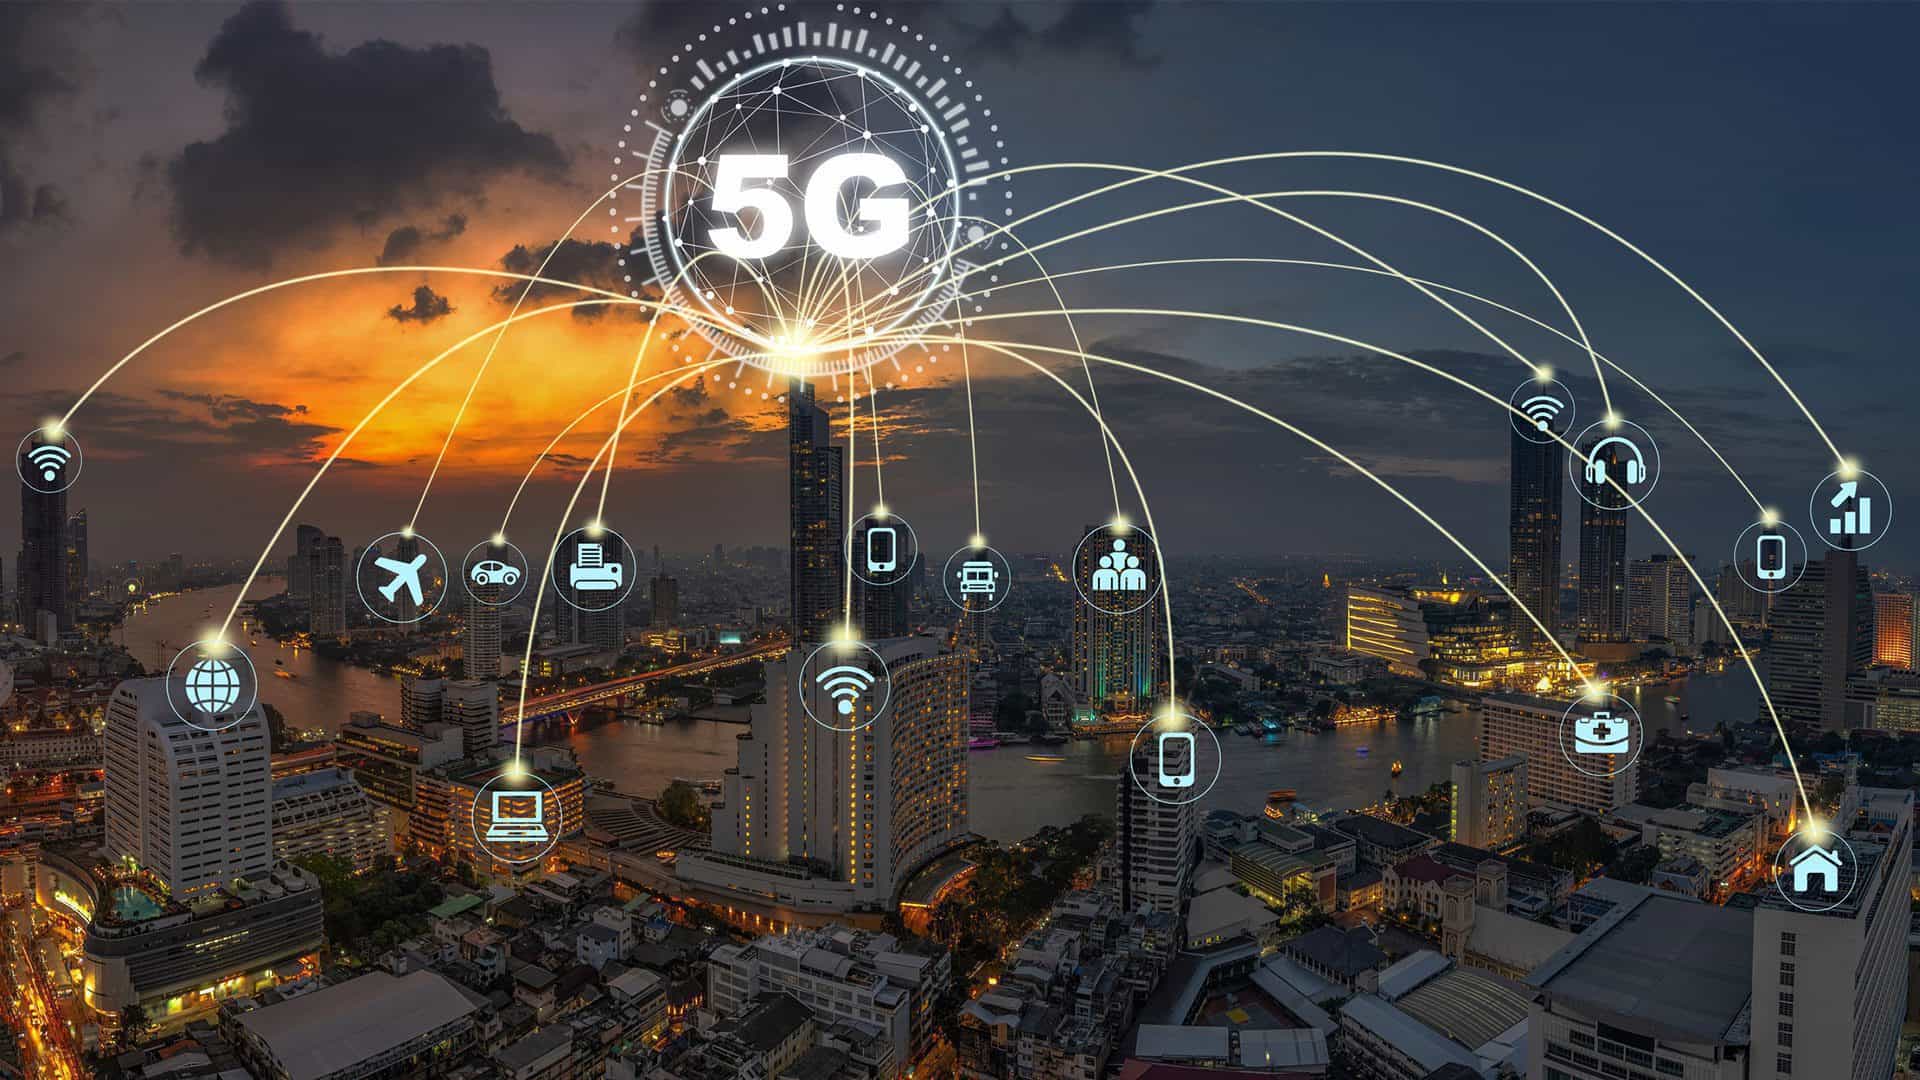 What will change in next-generation 5G communication technology?